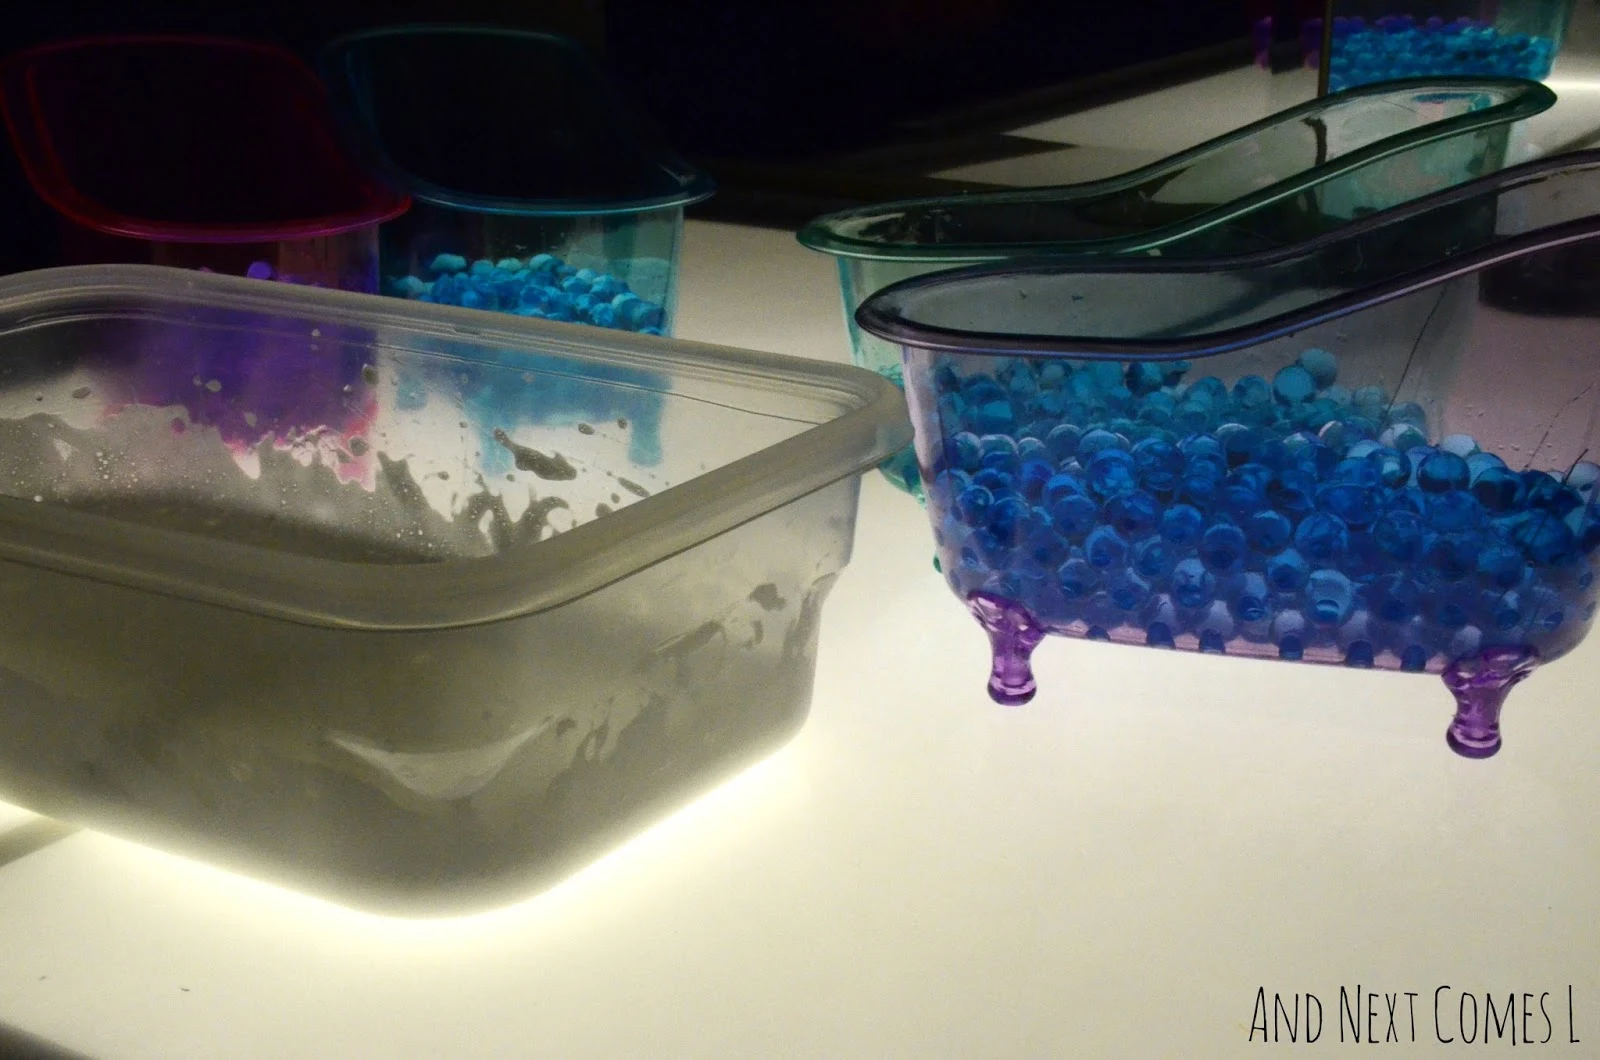 Soap foam, bathtub containers, and water beads on the light table from And Next Comes L